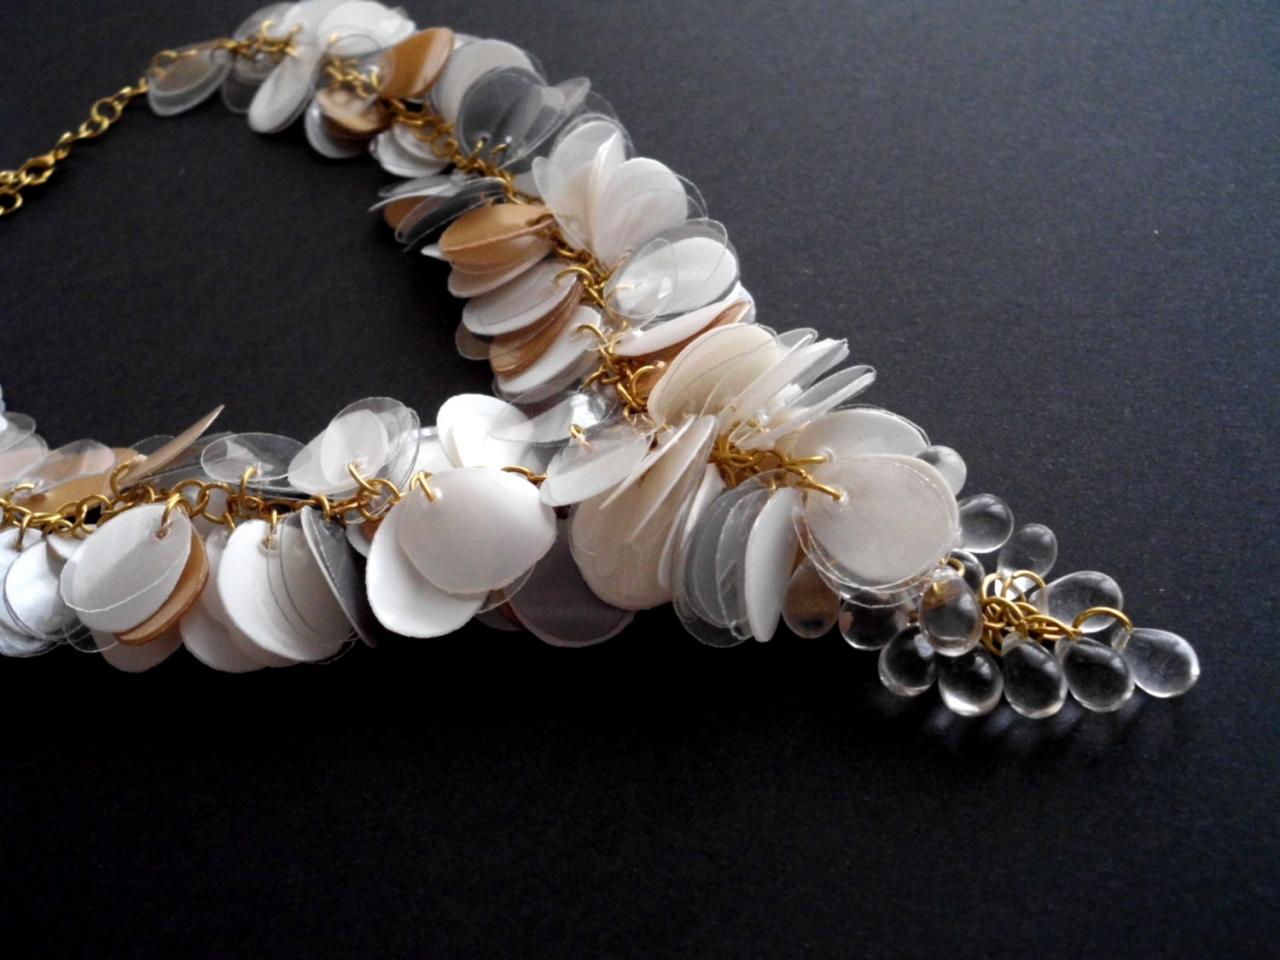 Statement Necklace Made Of Recycled Plastic Bottles - Upcycled Jewelry, Eco-friendly, Golden & White